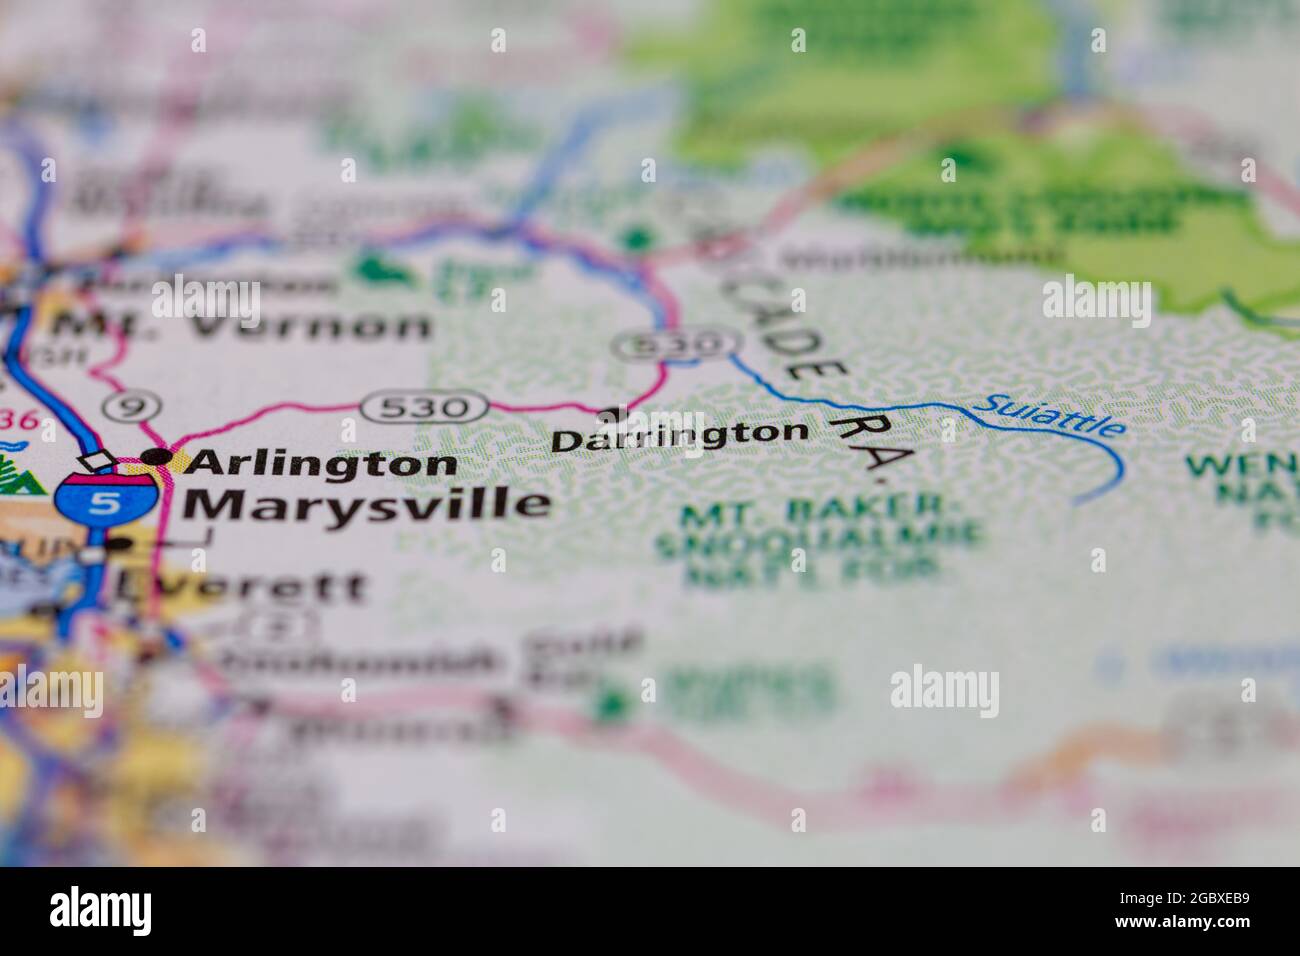 Darrington Washington State USA shown on a road map or Geography map Stock Photo